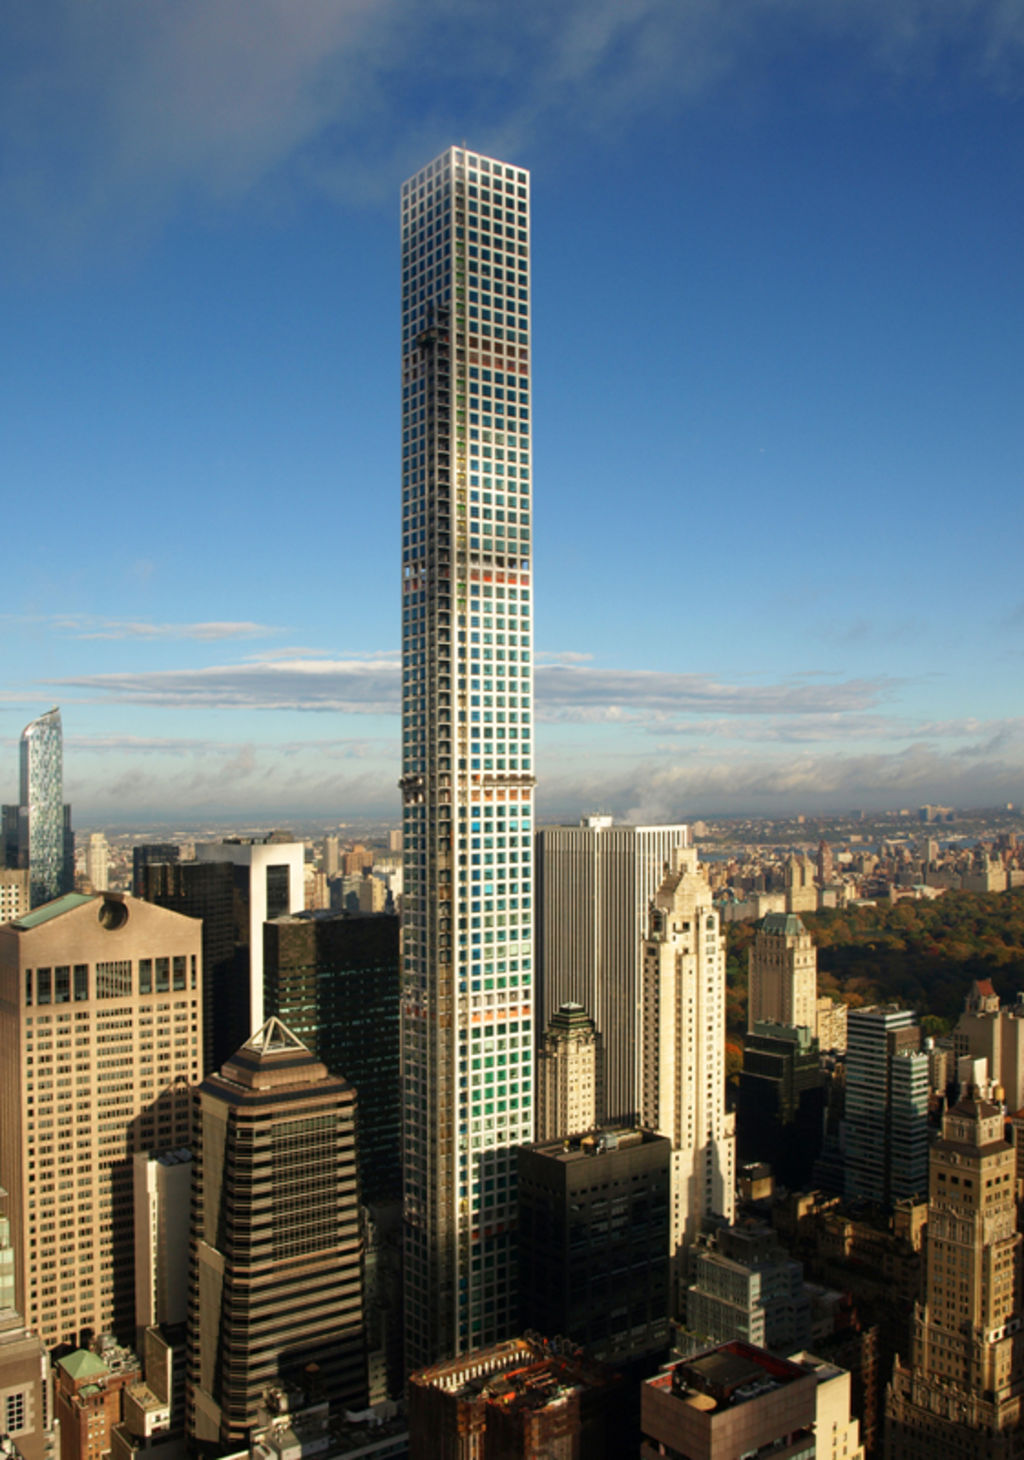 World's 100th supertall skyscraper completed in New York